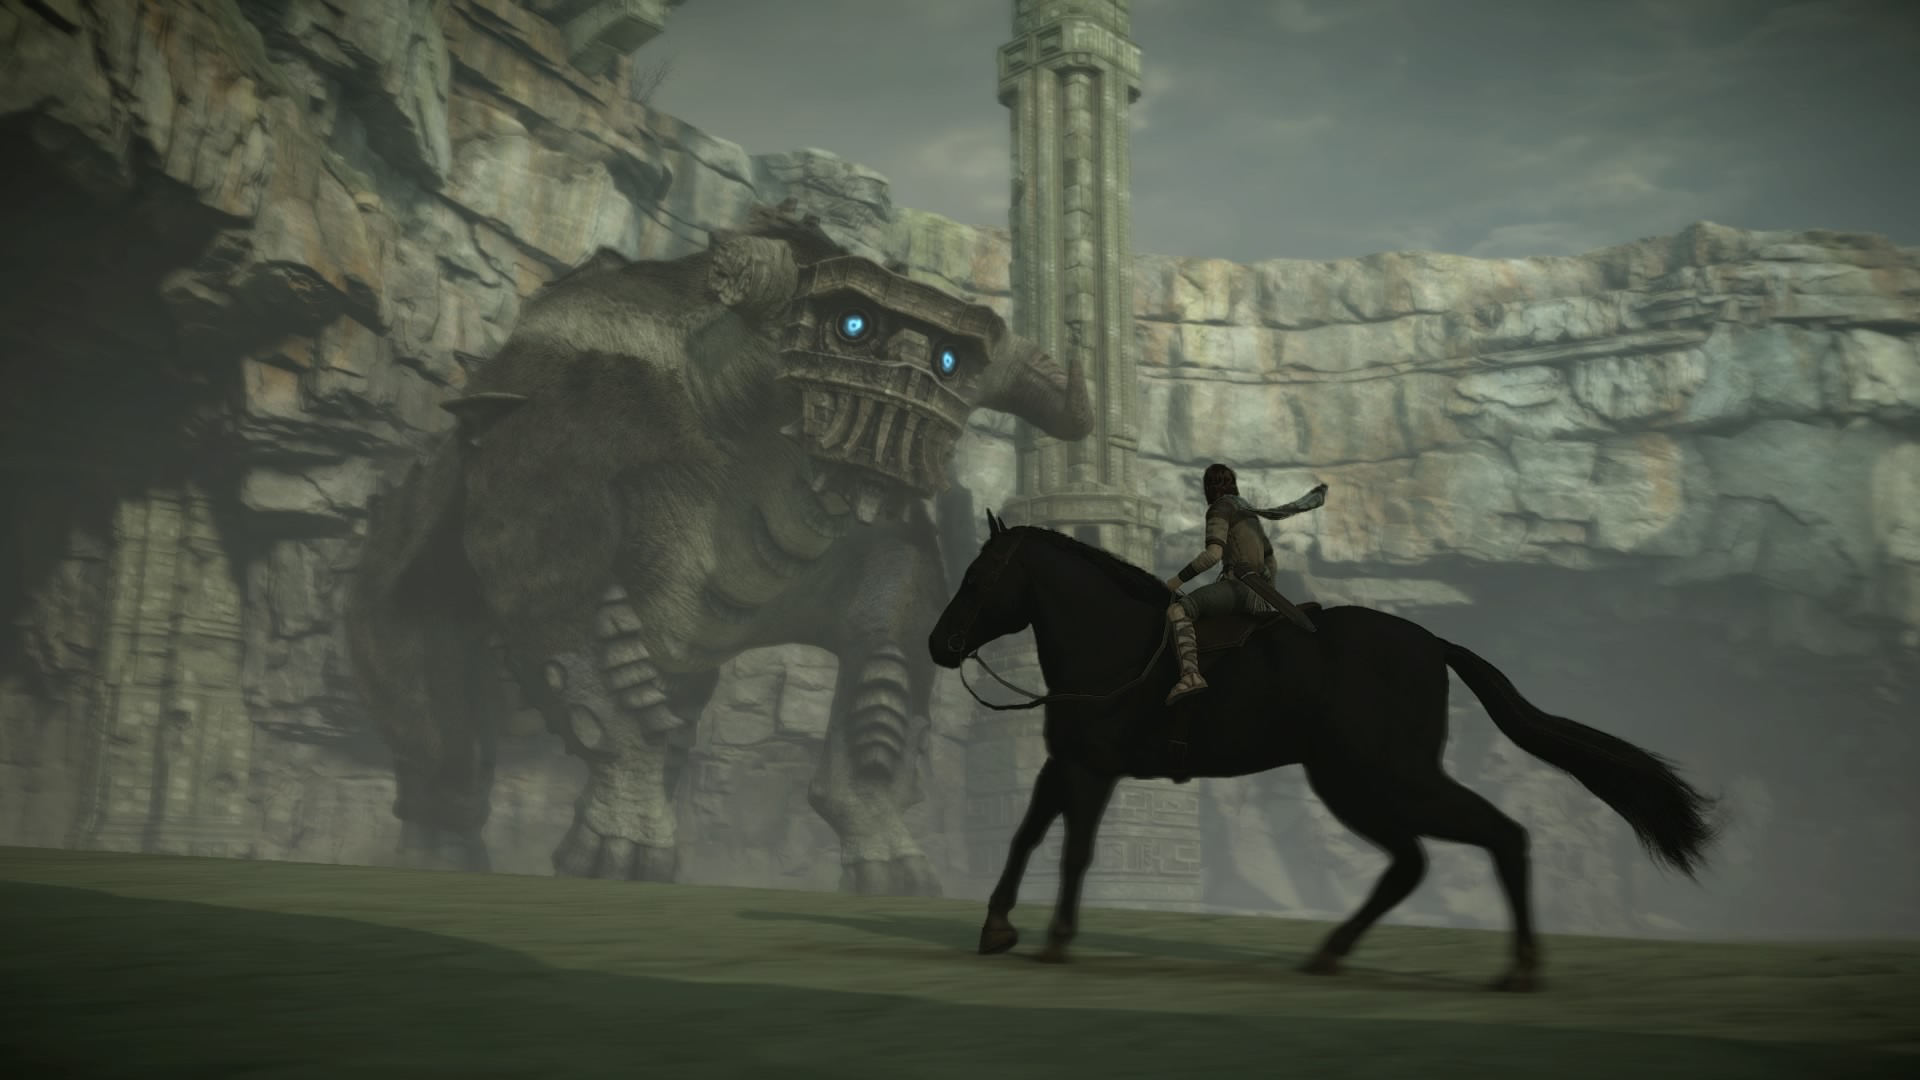 Shadow of the Colossus PS4 Gameplay Walkthrough Part 1 - 1st